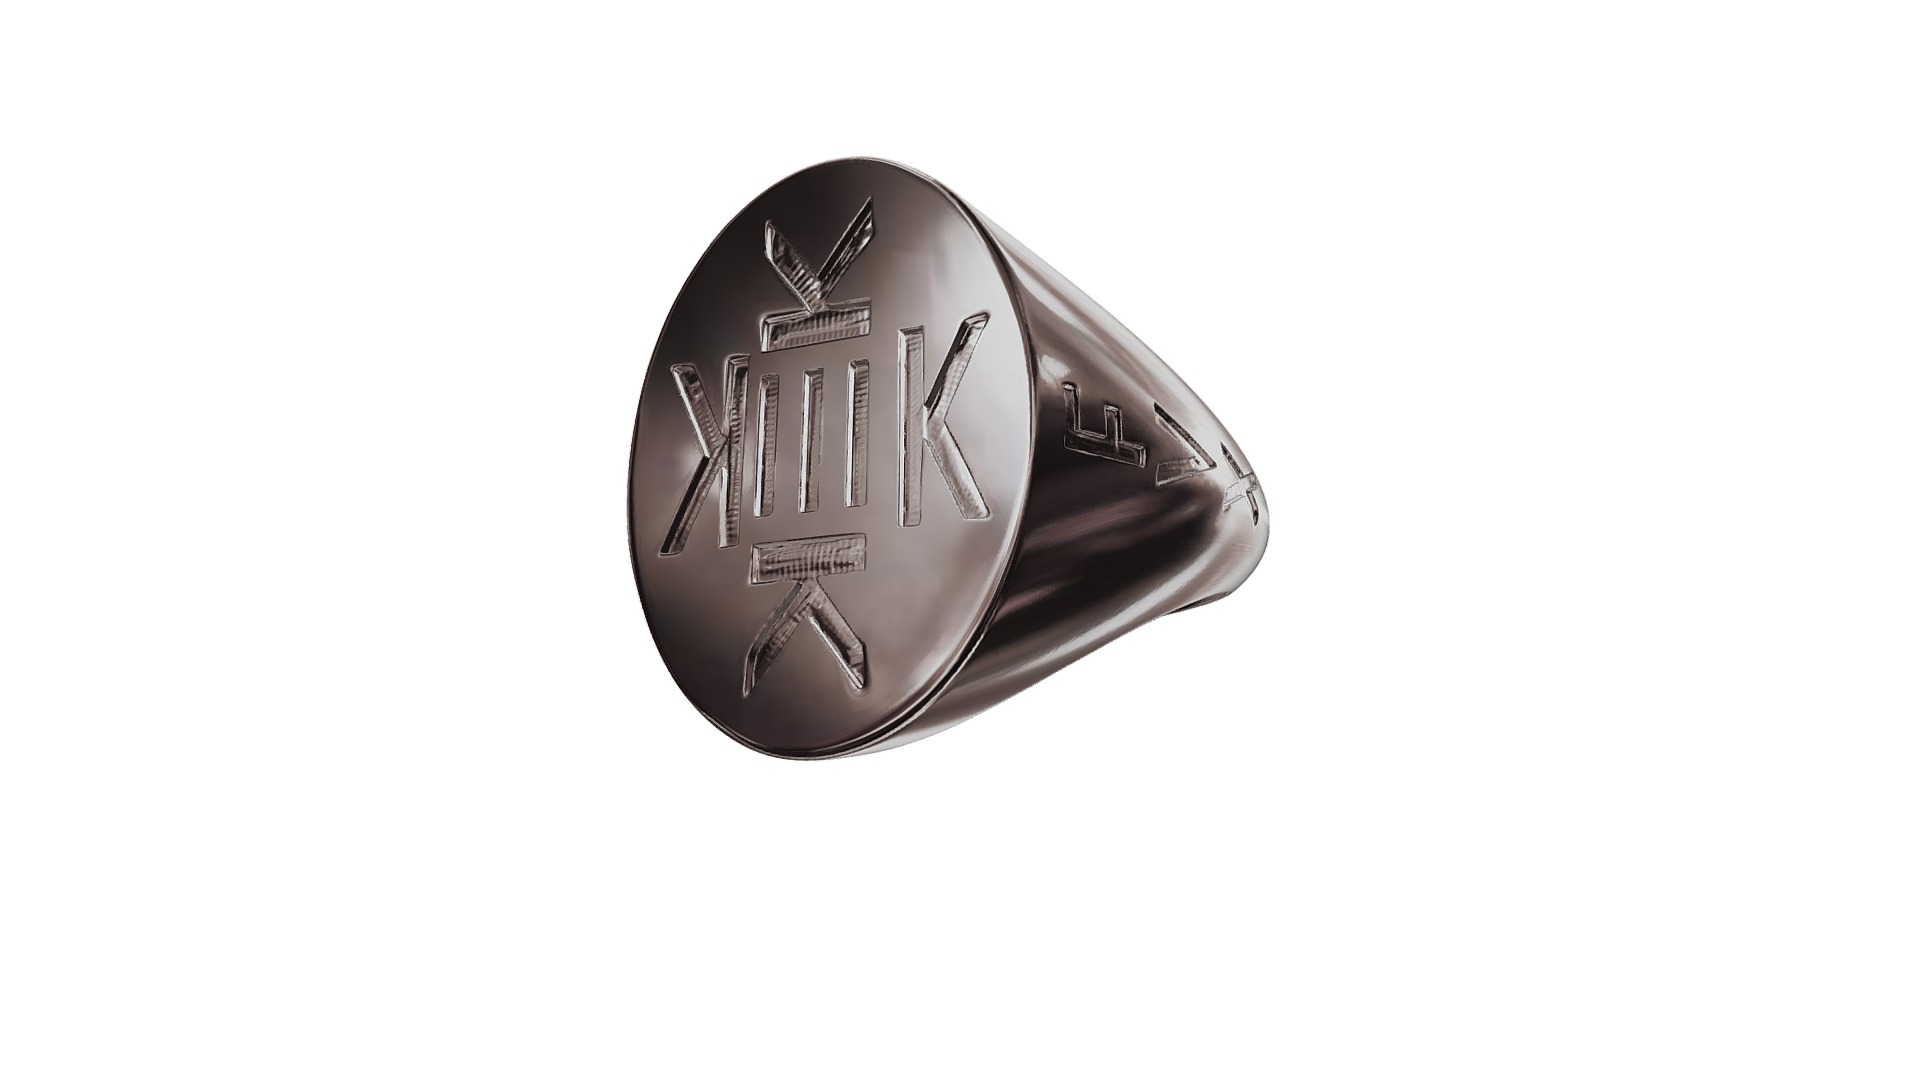 3D model Kekistan ring FVX edition - This is a 3D model of the Kekistan ring FVX edition. The 3D model is about logo.